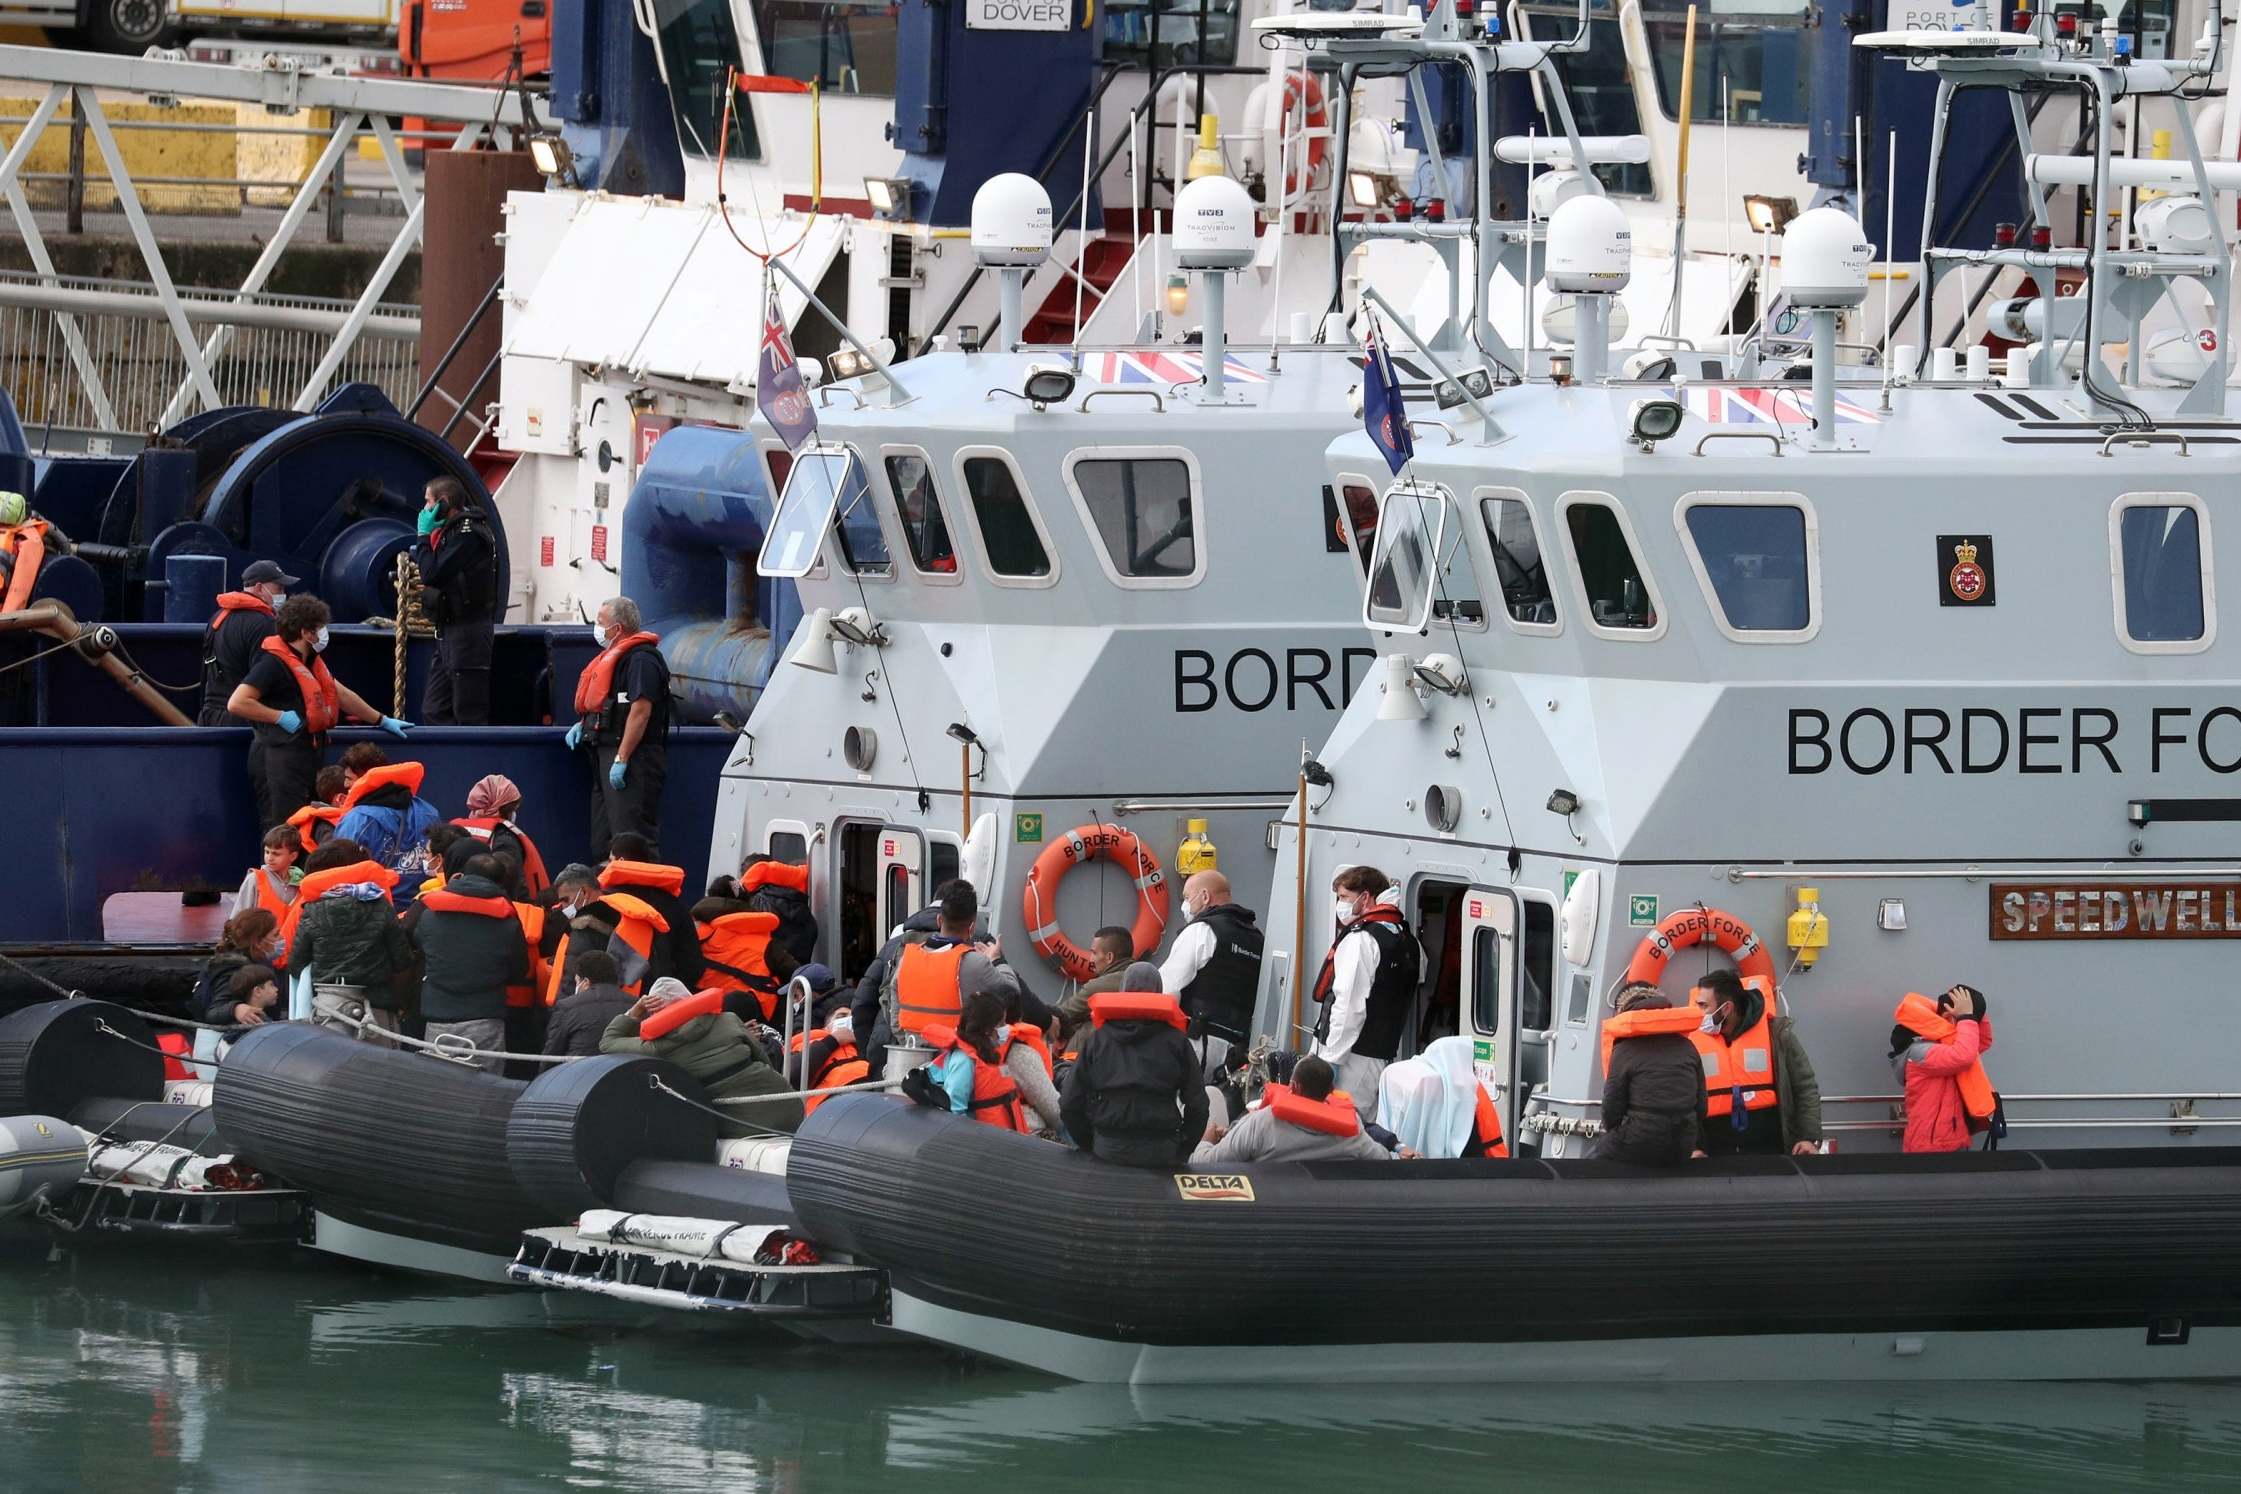 A group of people thought to be migrants are brought into Dover by Border Force officers following a small boat incident in the Channel, on Wednesday 2 September 2020